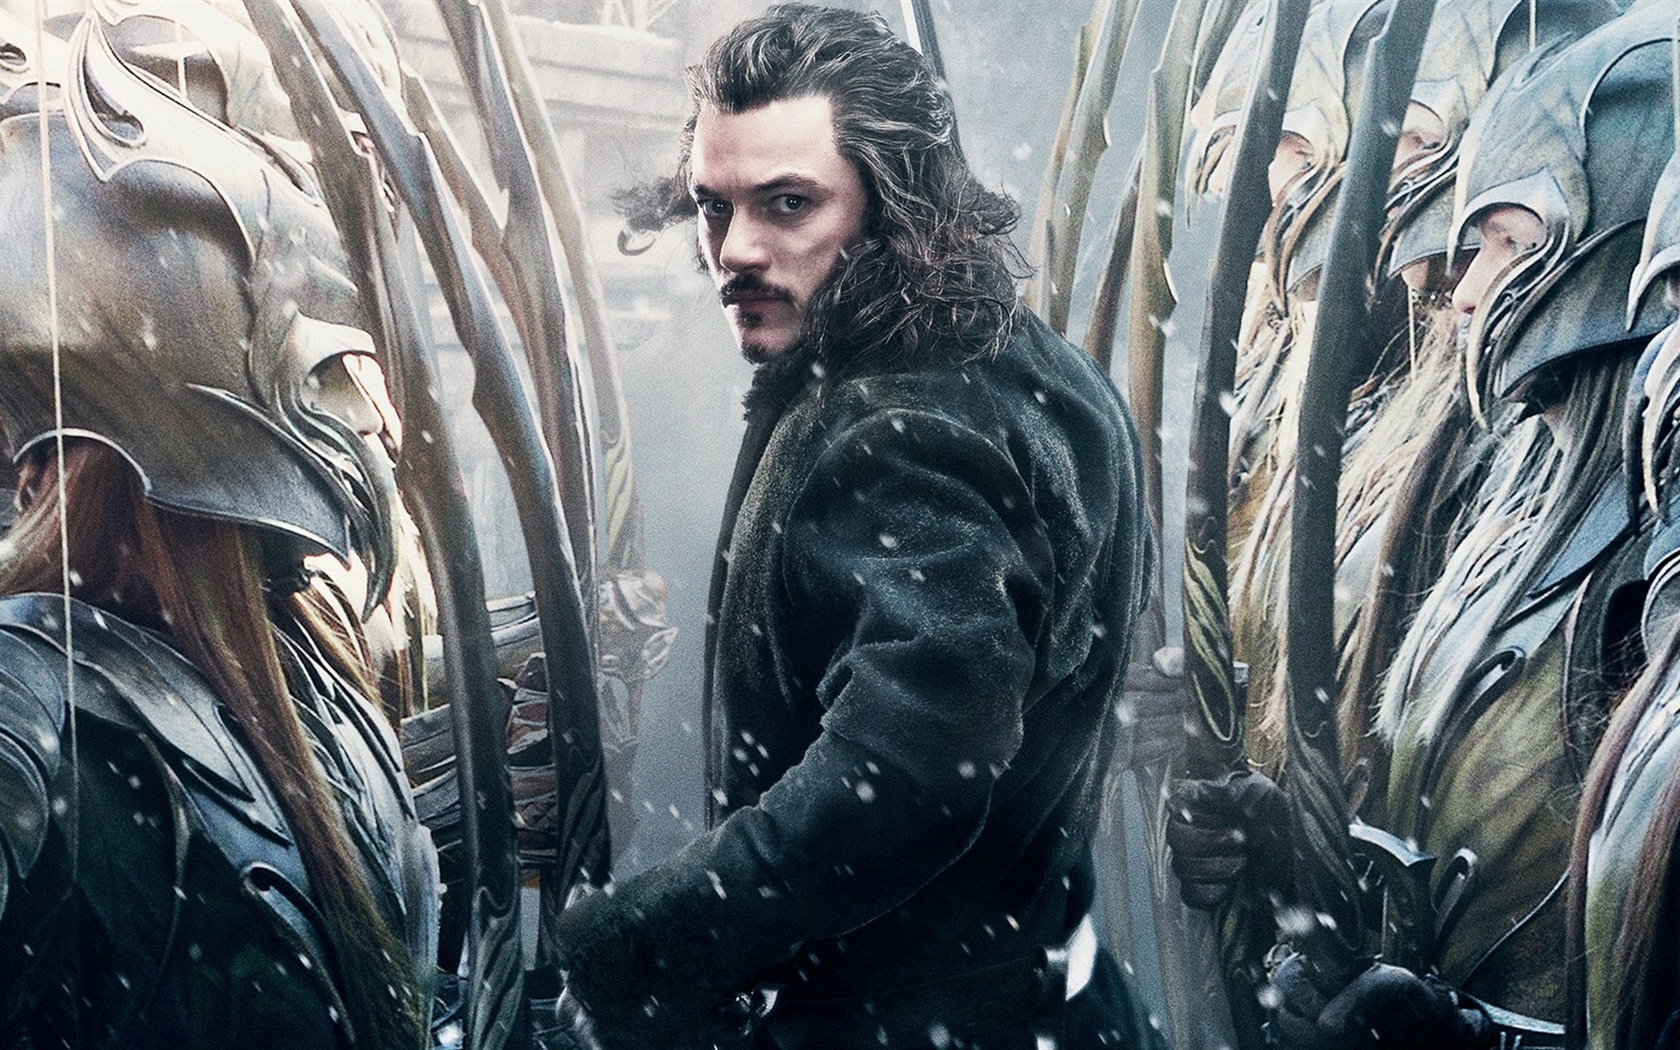 The Hobbit: The Battle of the Five Armies, movie HD wallpapers #8 - 1680x1050